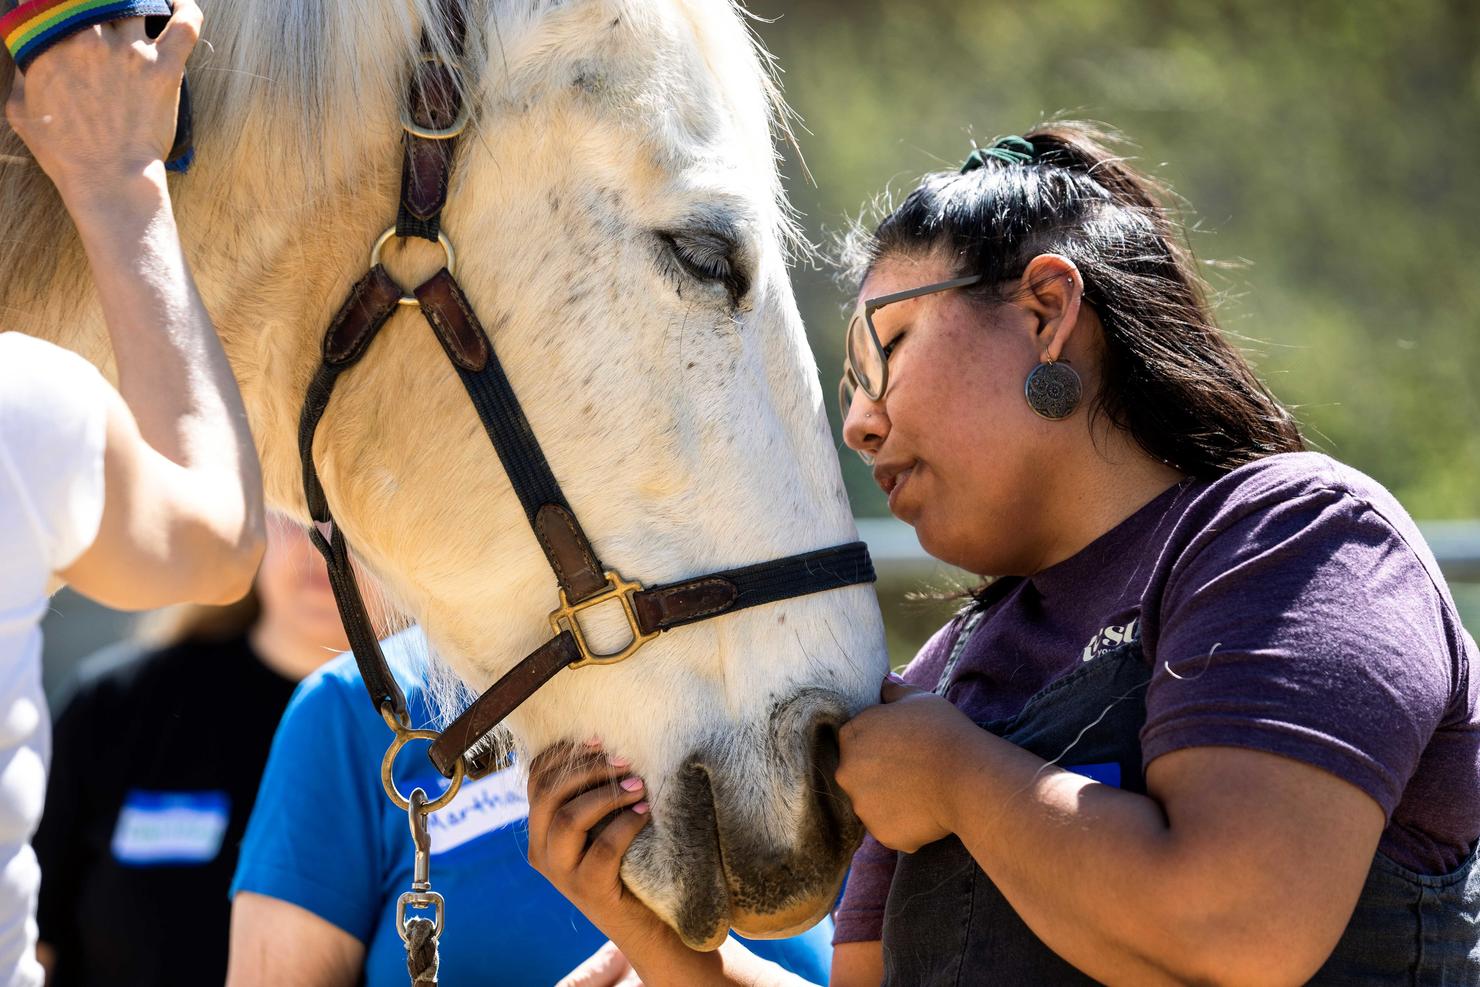 Mason social work student stands face to face with a horse from the Project Horse Empowerment Center, tenderly petting the horse's chin.